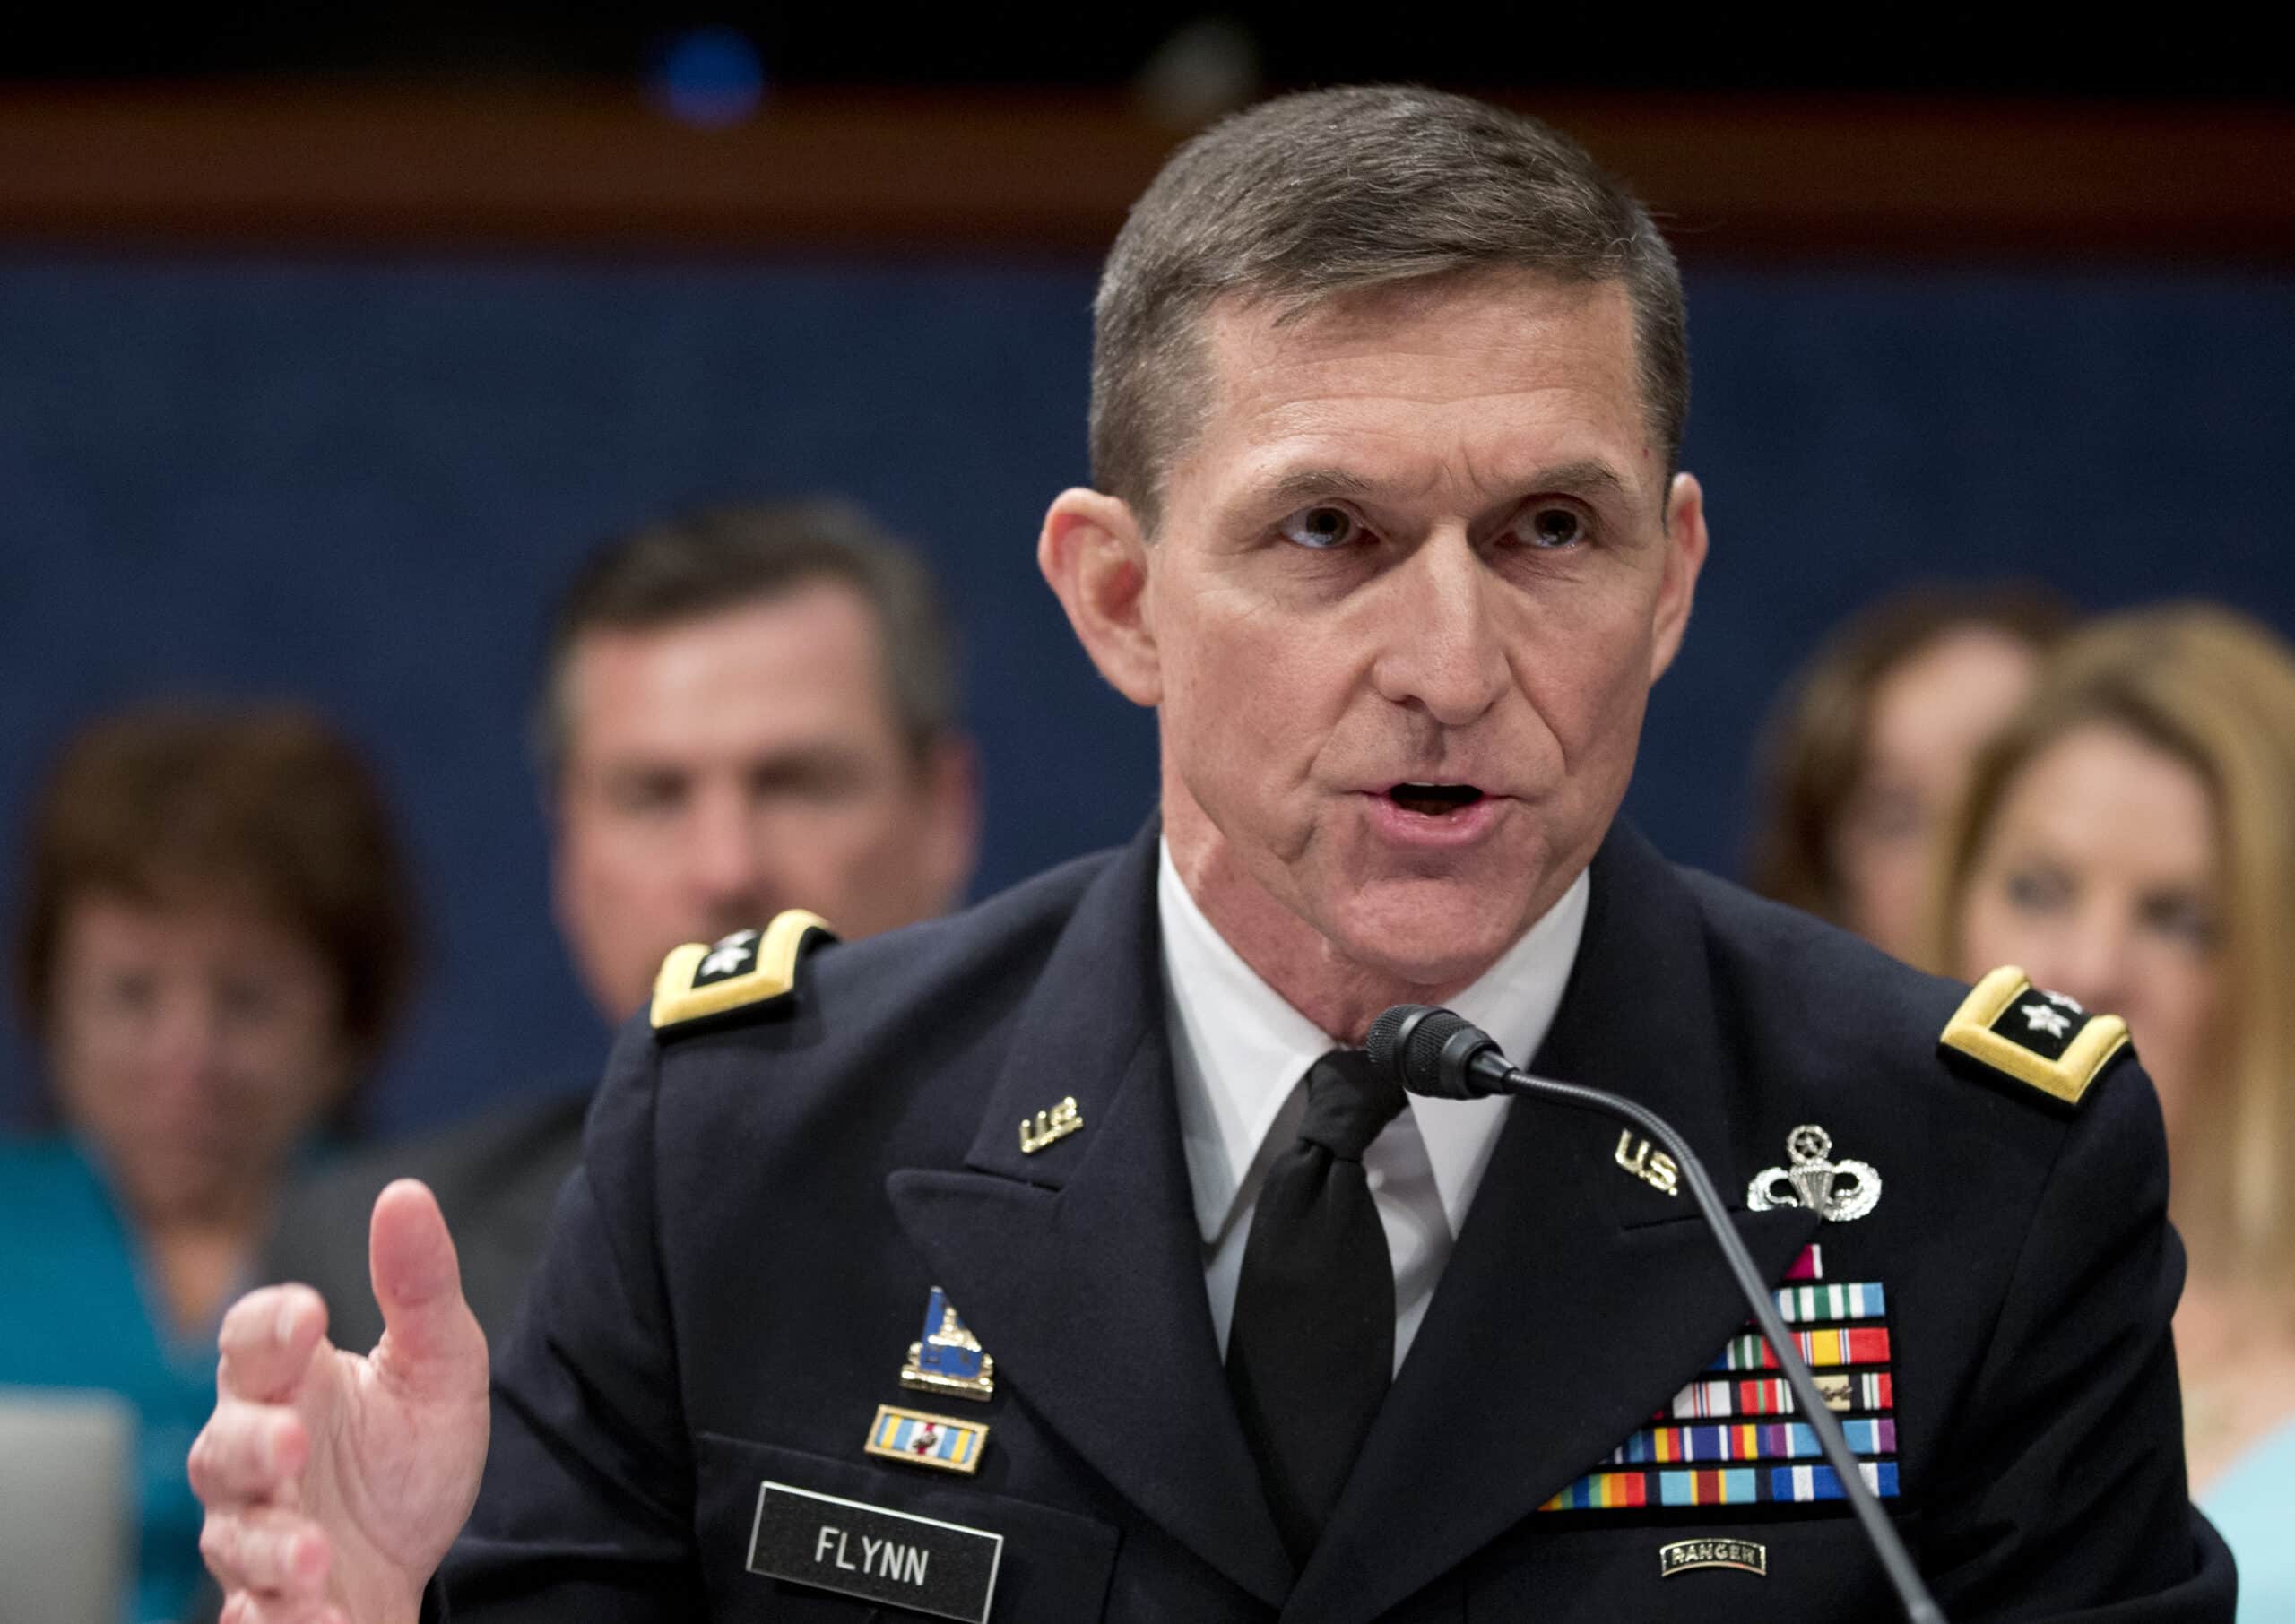 https://www.nbcnews.com/news/us-news/trump-national-security-adviser-pick-has-medals-baggage-n685681